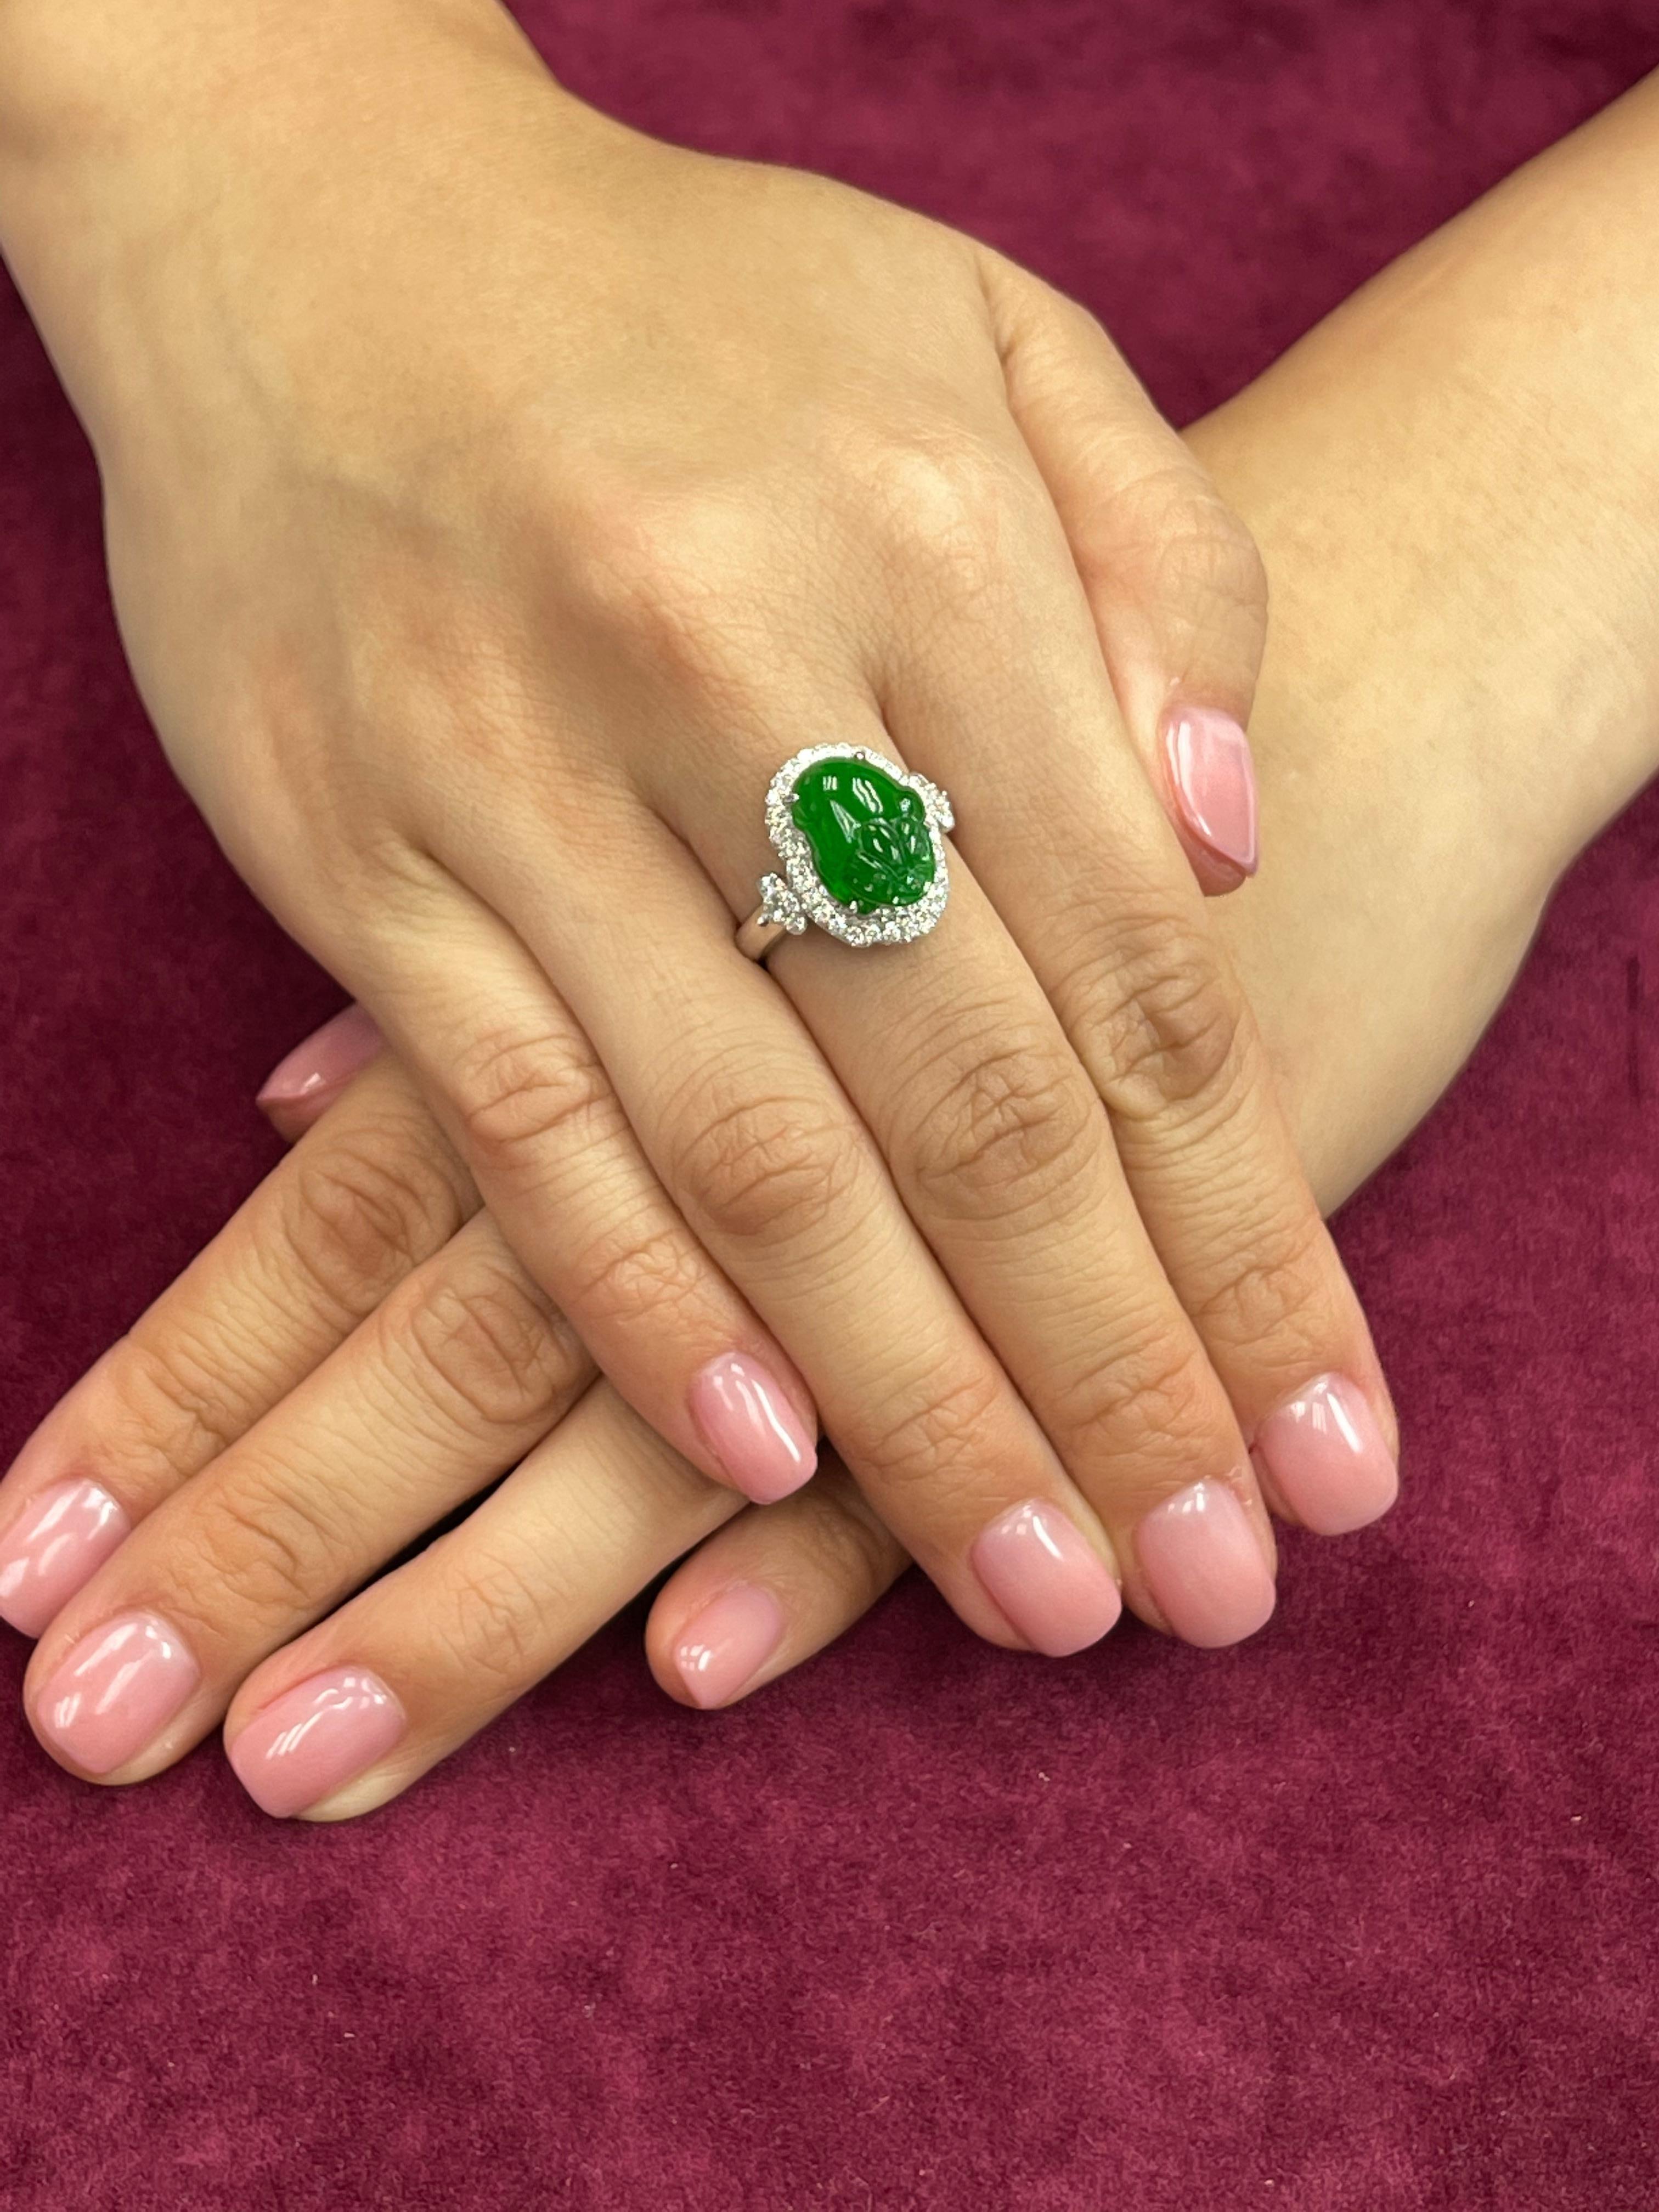 This ring has the best imperial green color, it GLOWS! Here is an imperial green Jade and diamond ring. It is certified by 2 labs natural jadeite jade. The ring is set in 18k white gold and diamonds. There are white diamonds totaling 0.457 cts. The